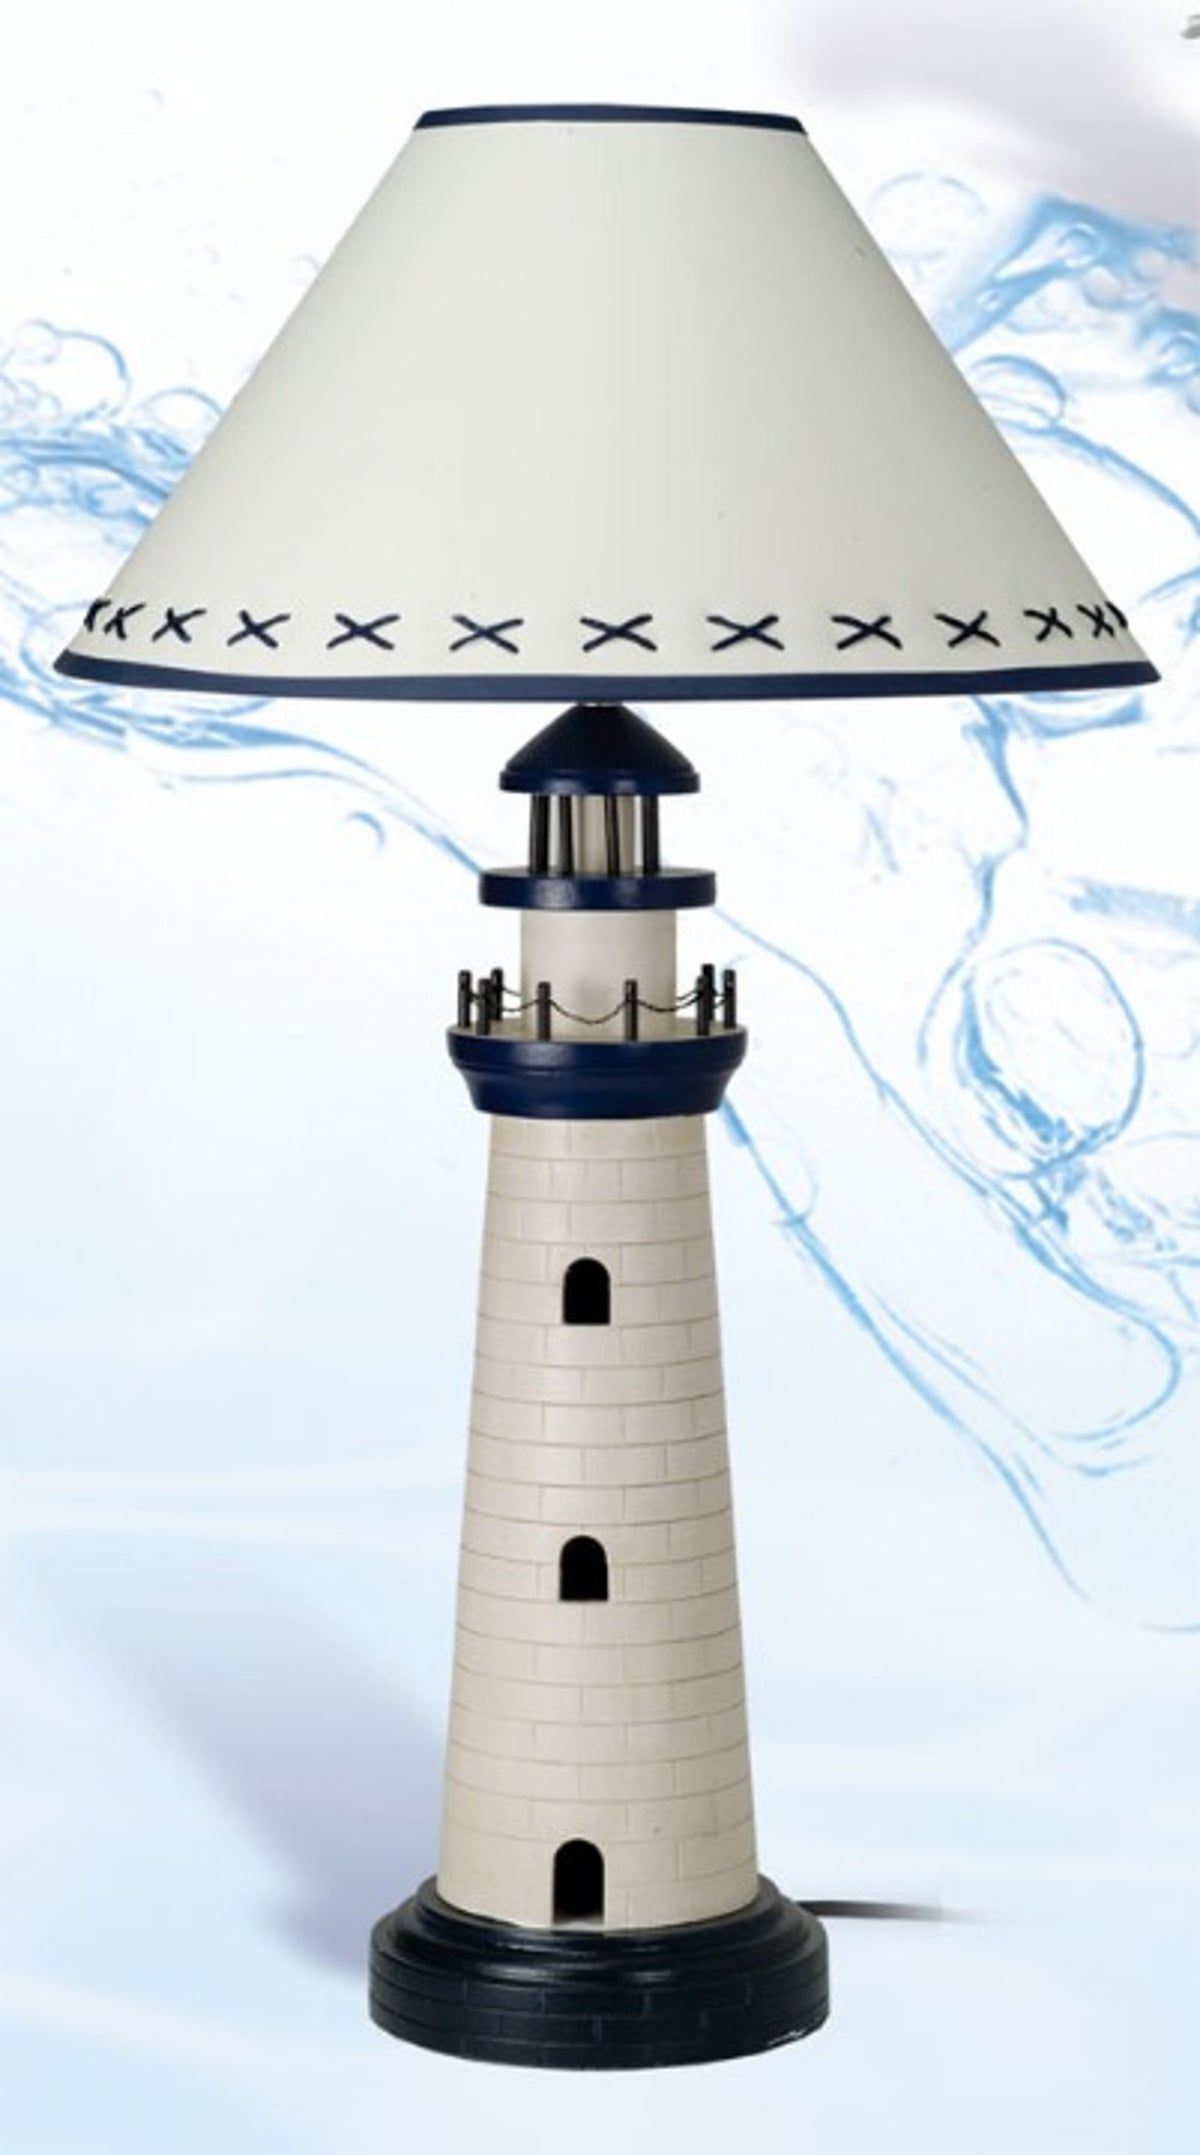 Nautical themed lamps